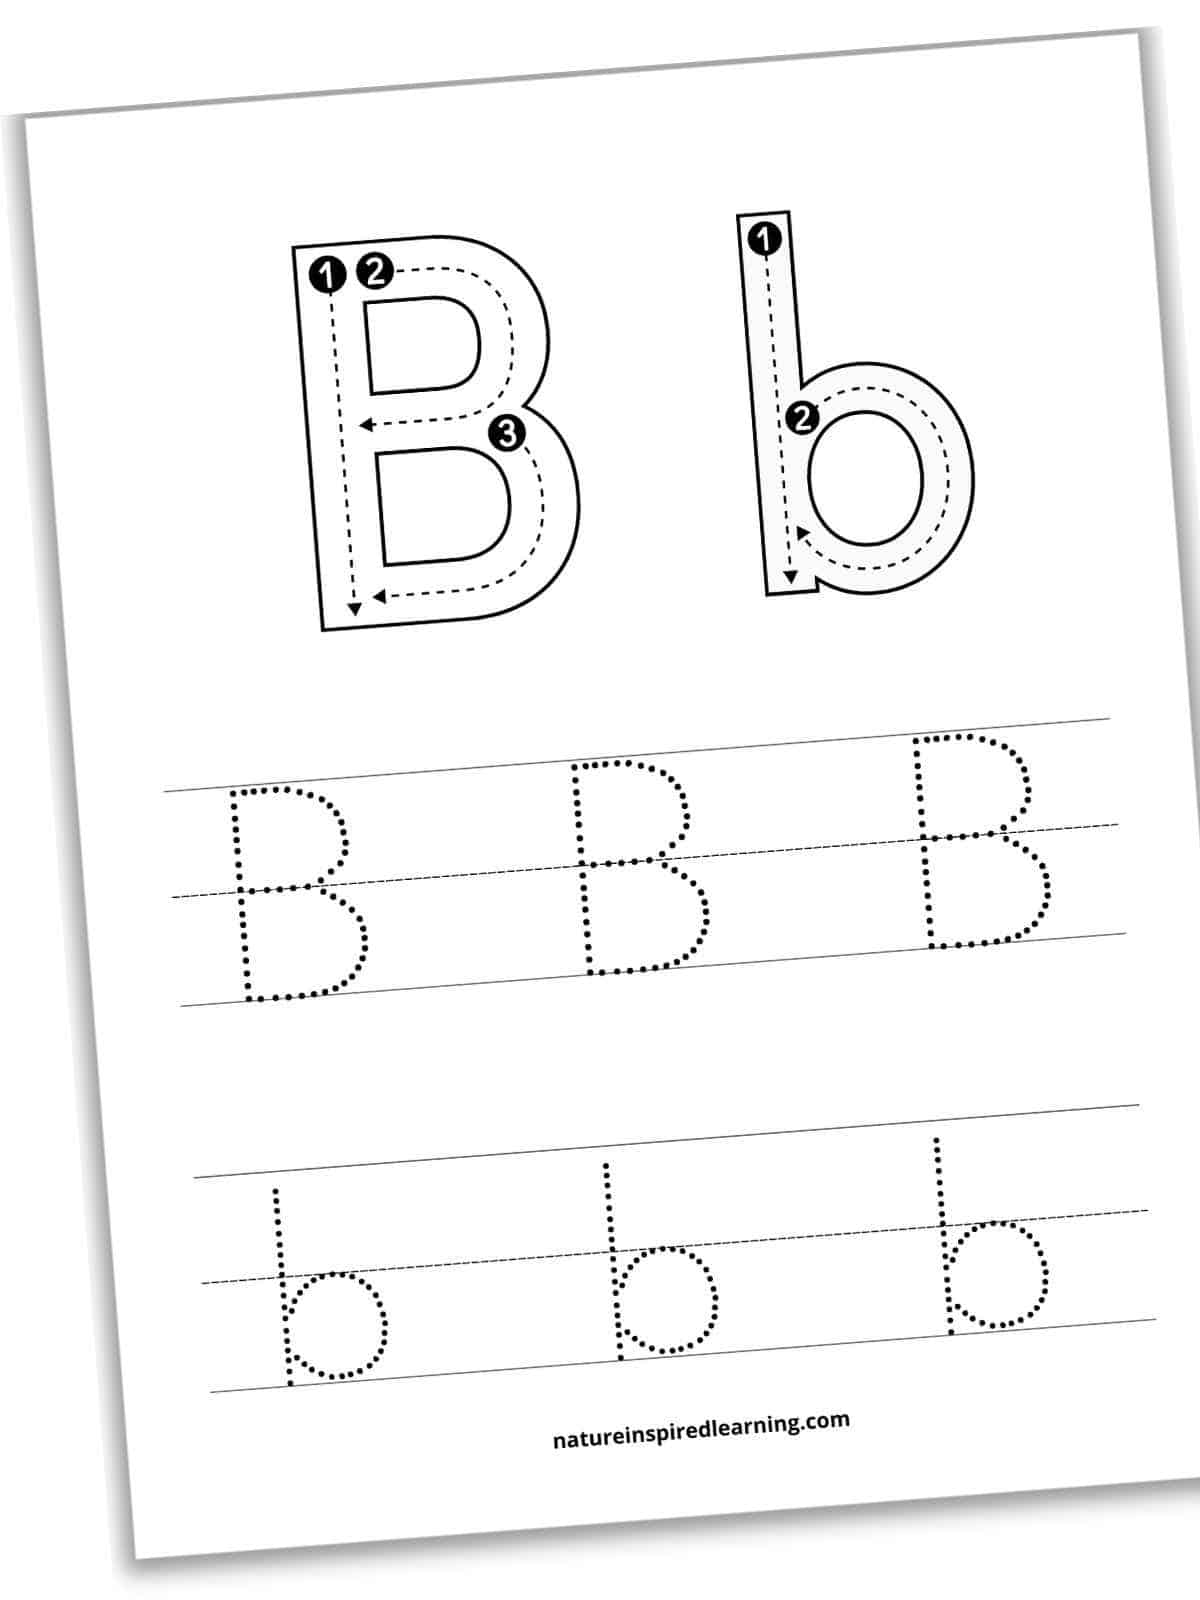 trace letter b worksheet with a large capital and lowercase b across the top in outline form with guidelines, arrows, and numbers. One row of three traceable capital letter B's above a row with three traceable lowercase letter b's. Printable slanted with a drop shadow